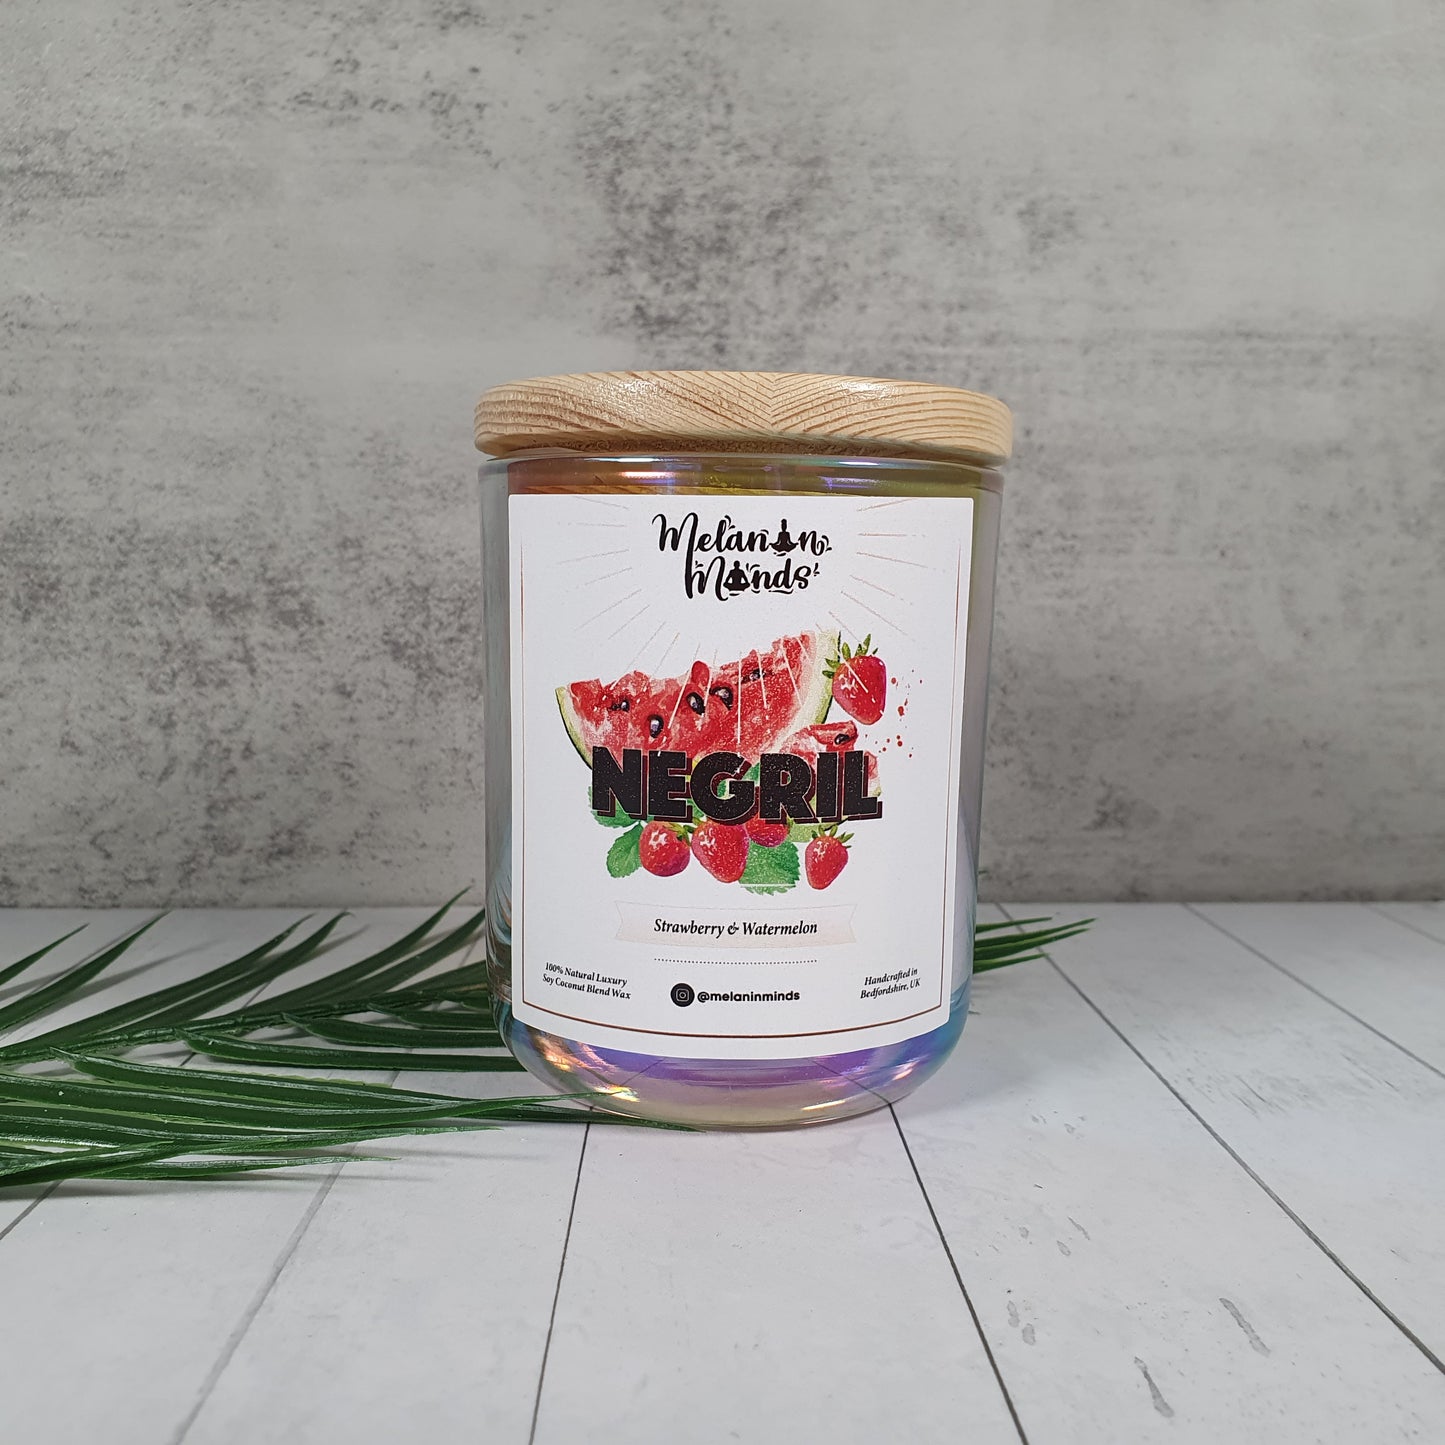 Negril | Strawberry & Watermelon Candle 300ml